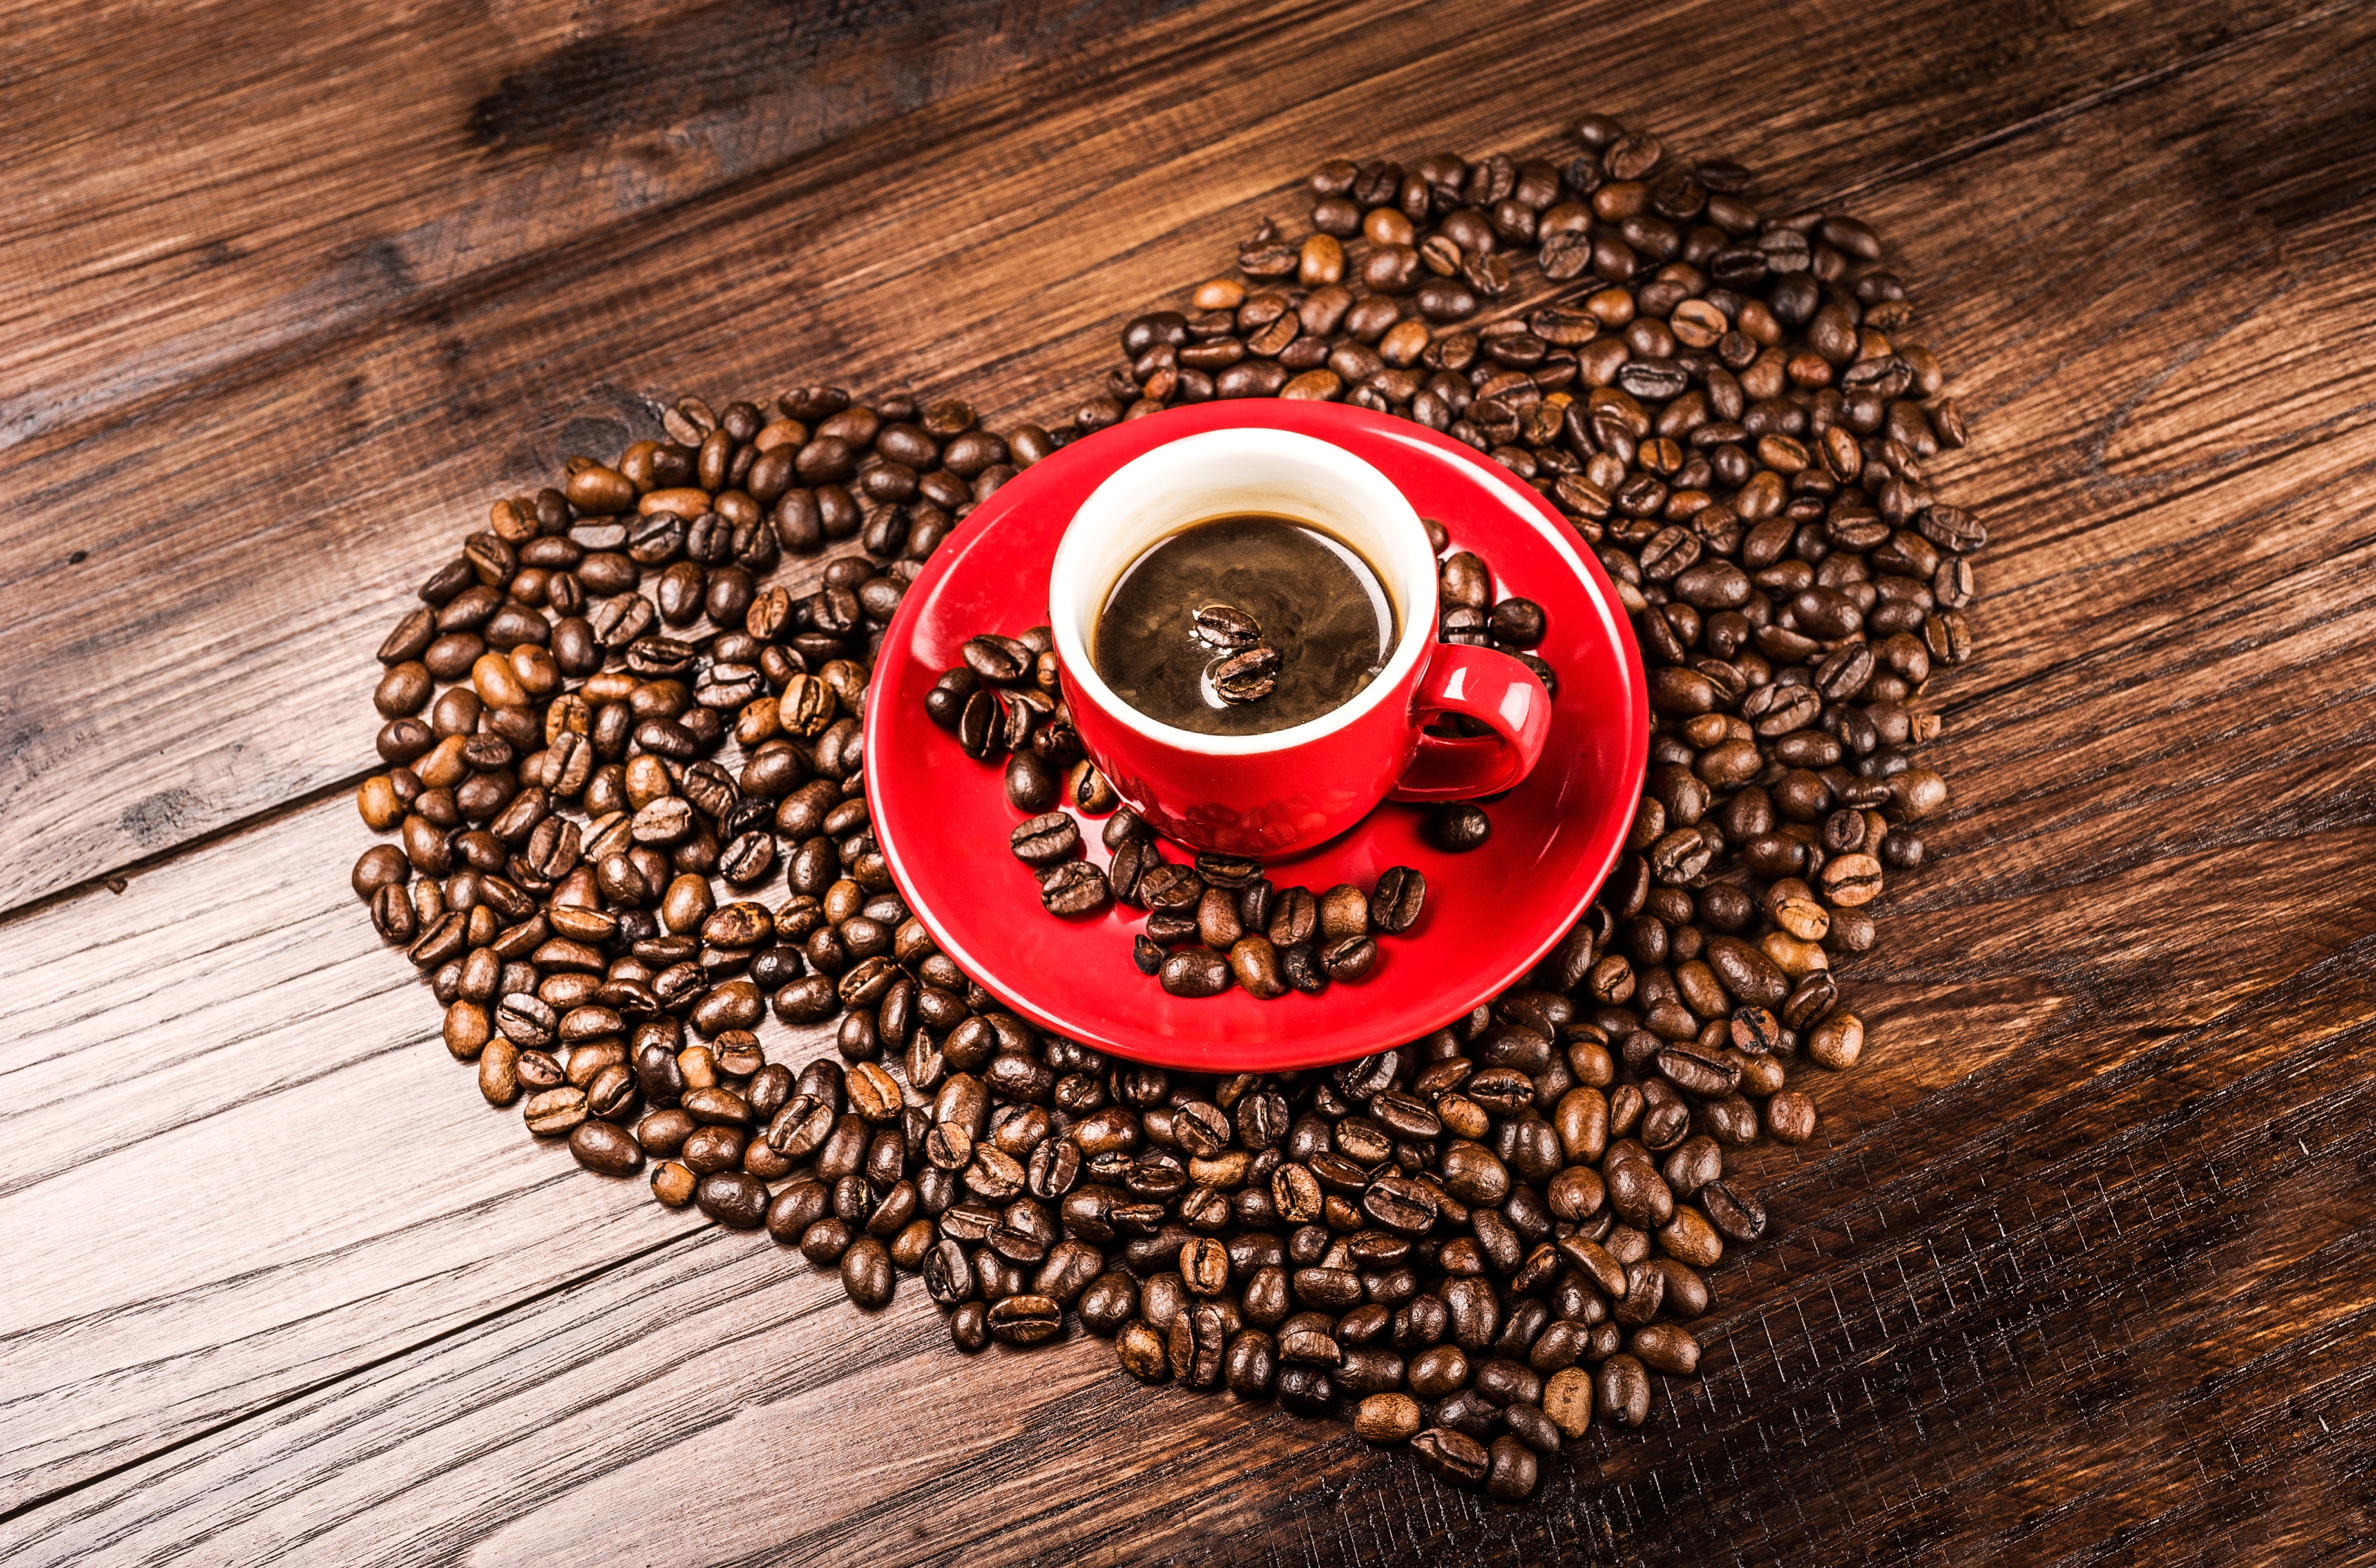 Download wallpaper heart, coffee, grain, Cup, red, saucer, section miscella...